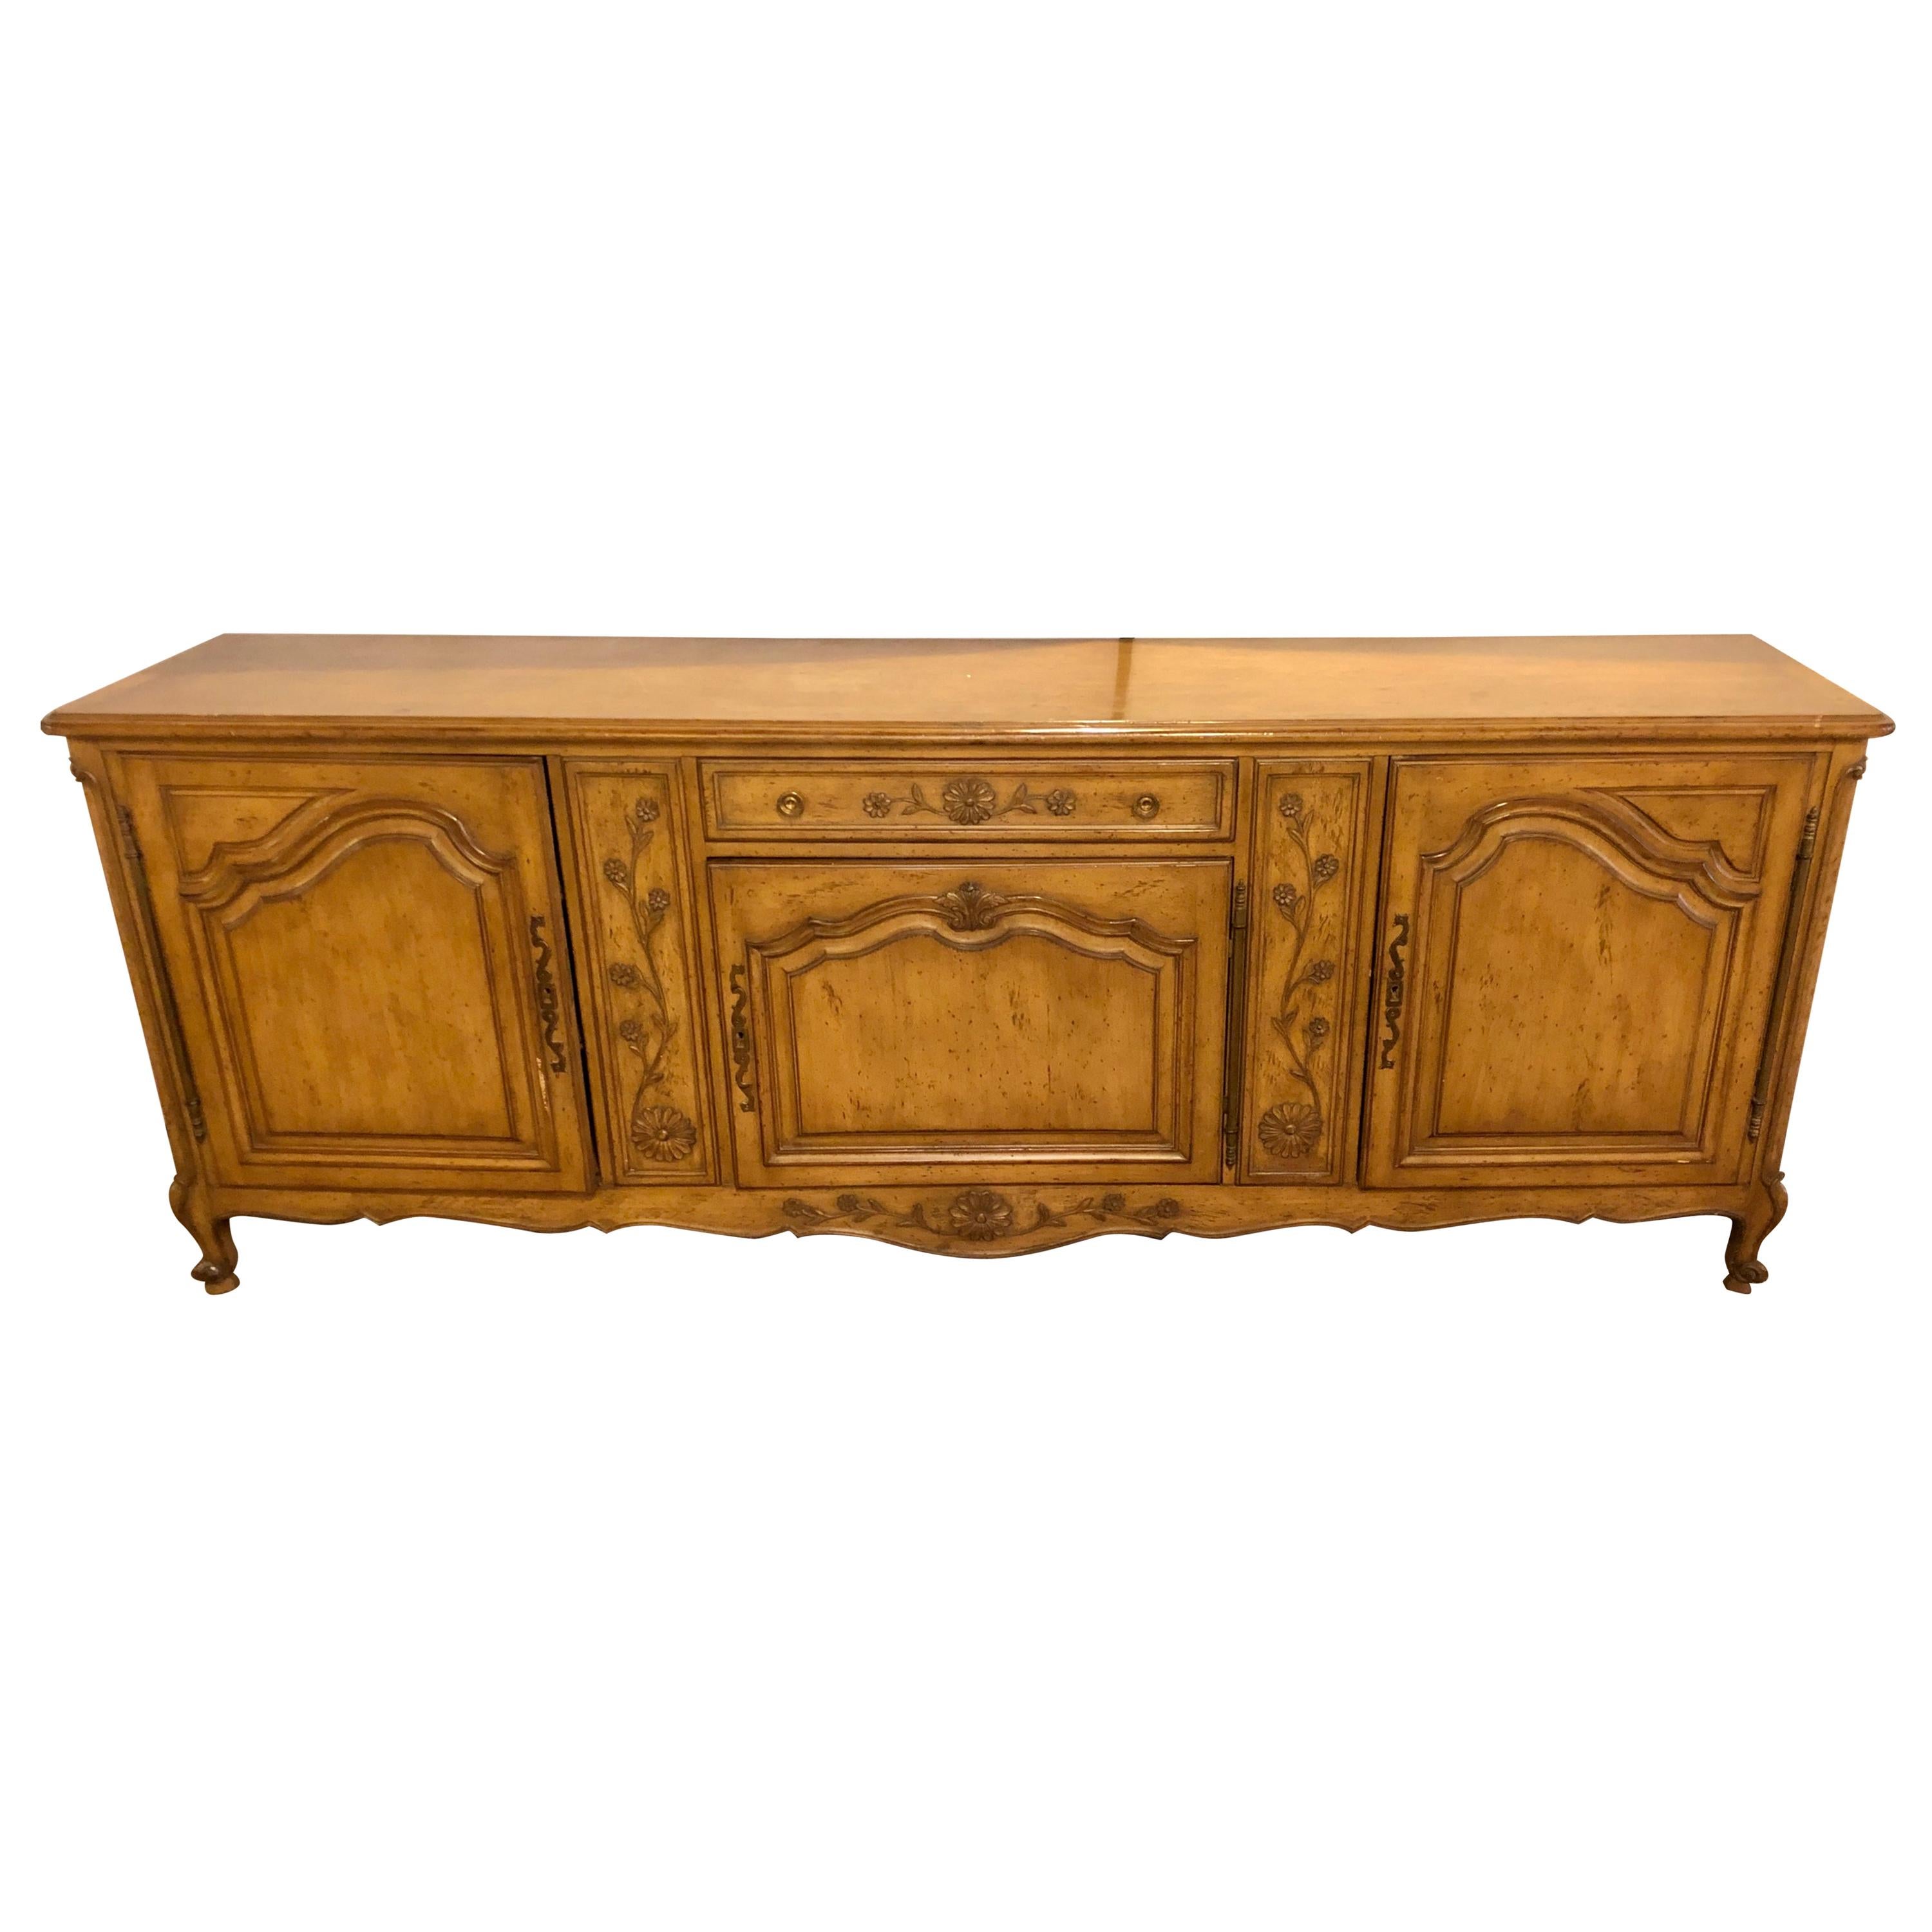 Auffray & Company, 18th Century Style Country French Sideboard / Buffet